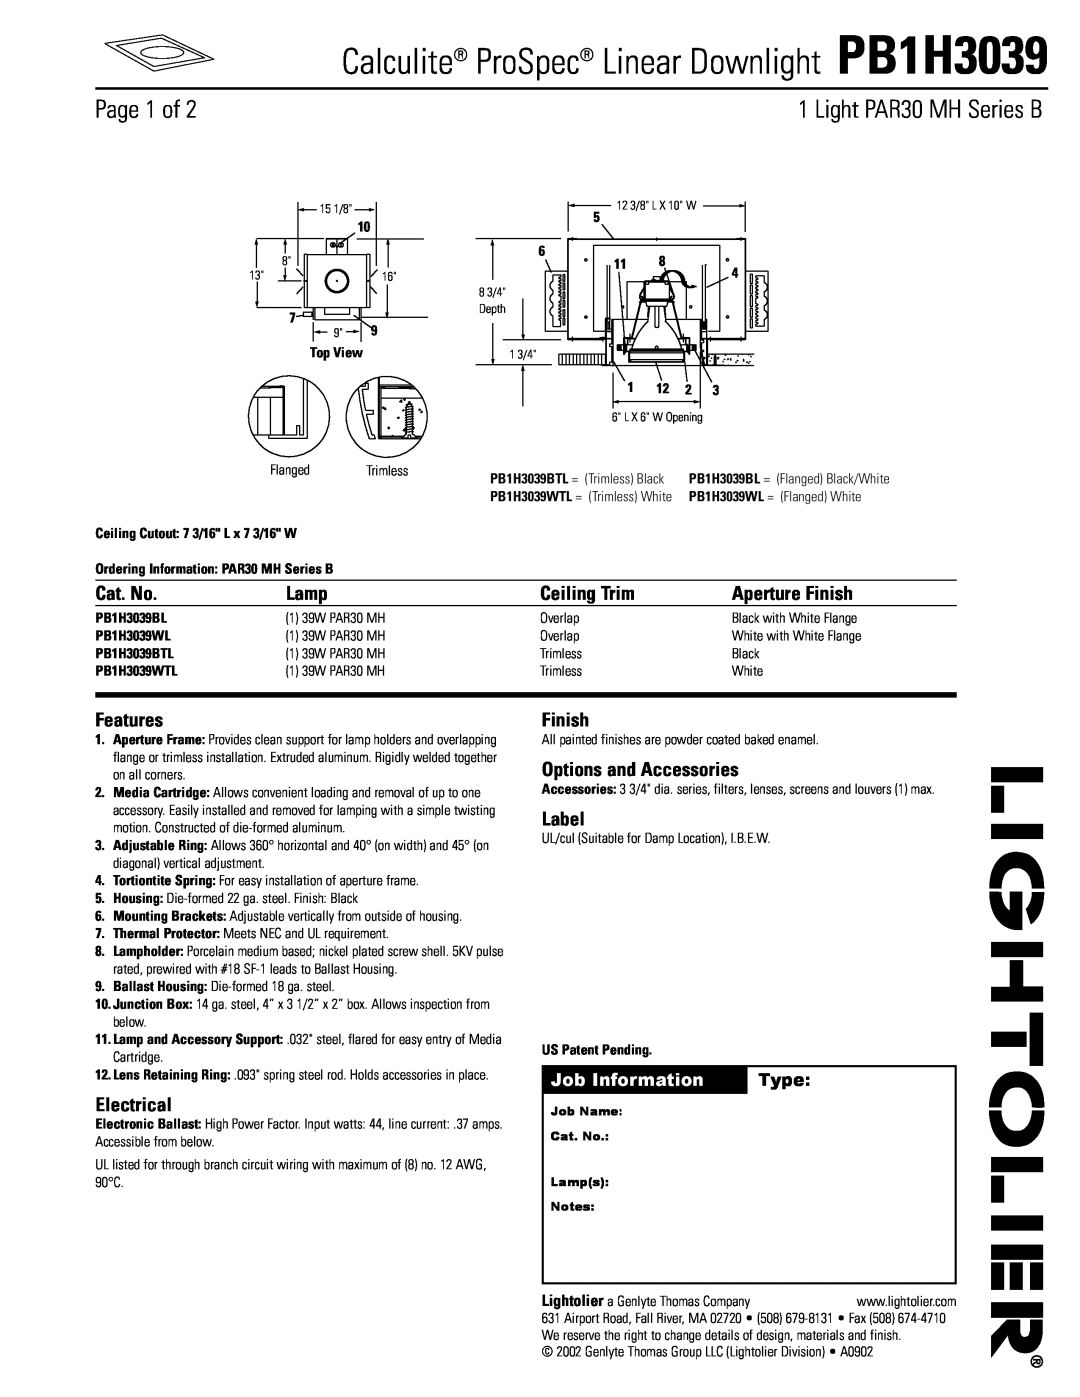 Lightolier PB1H3039 manual Page 1 of, Cat. No, Lamp, Aperture Finish, Features, Electrical, Options and Accessories, Label 